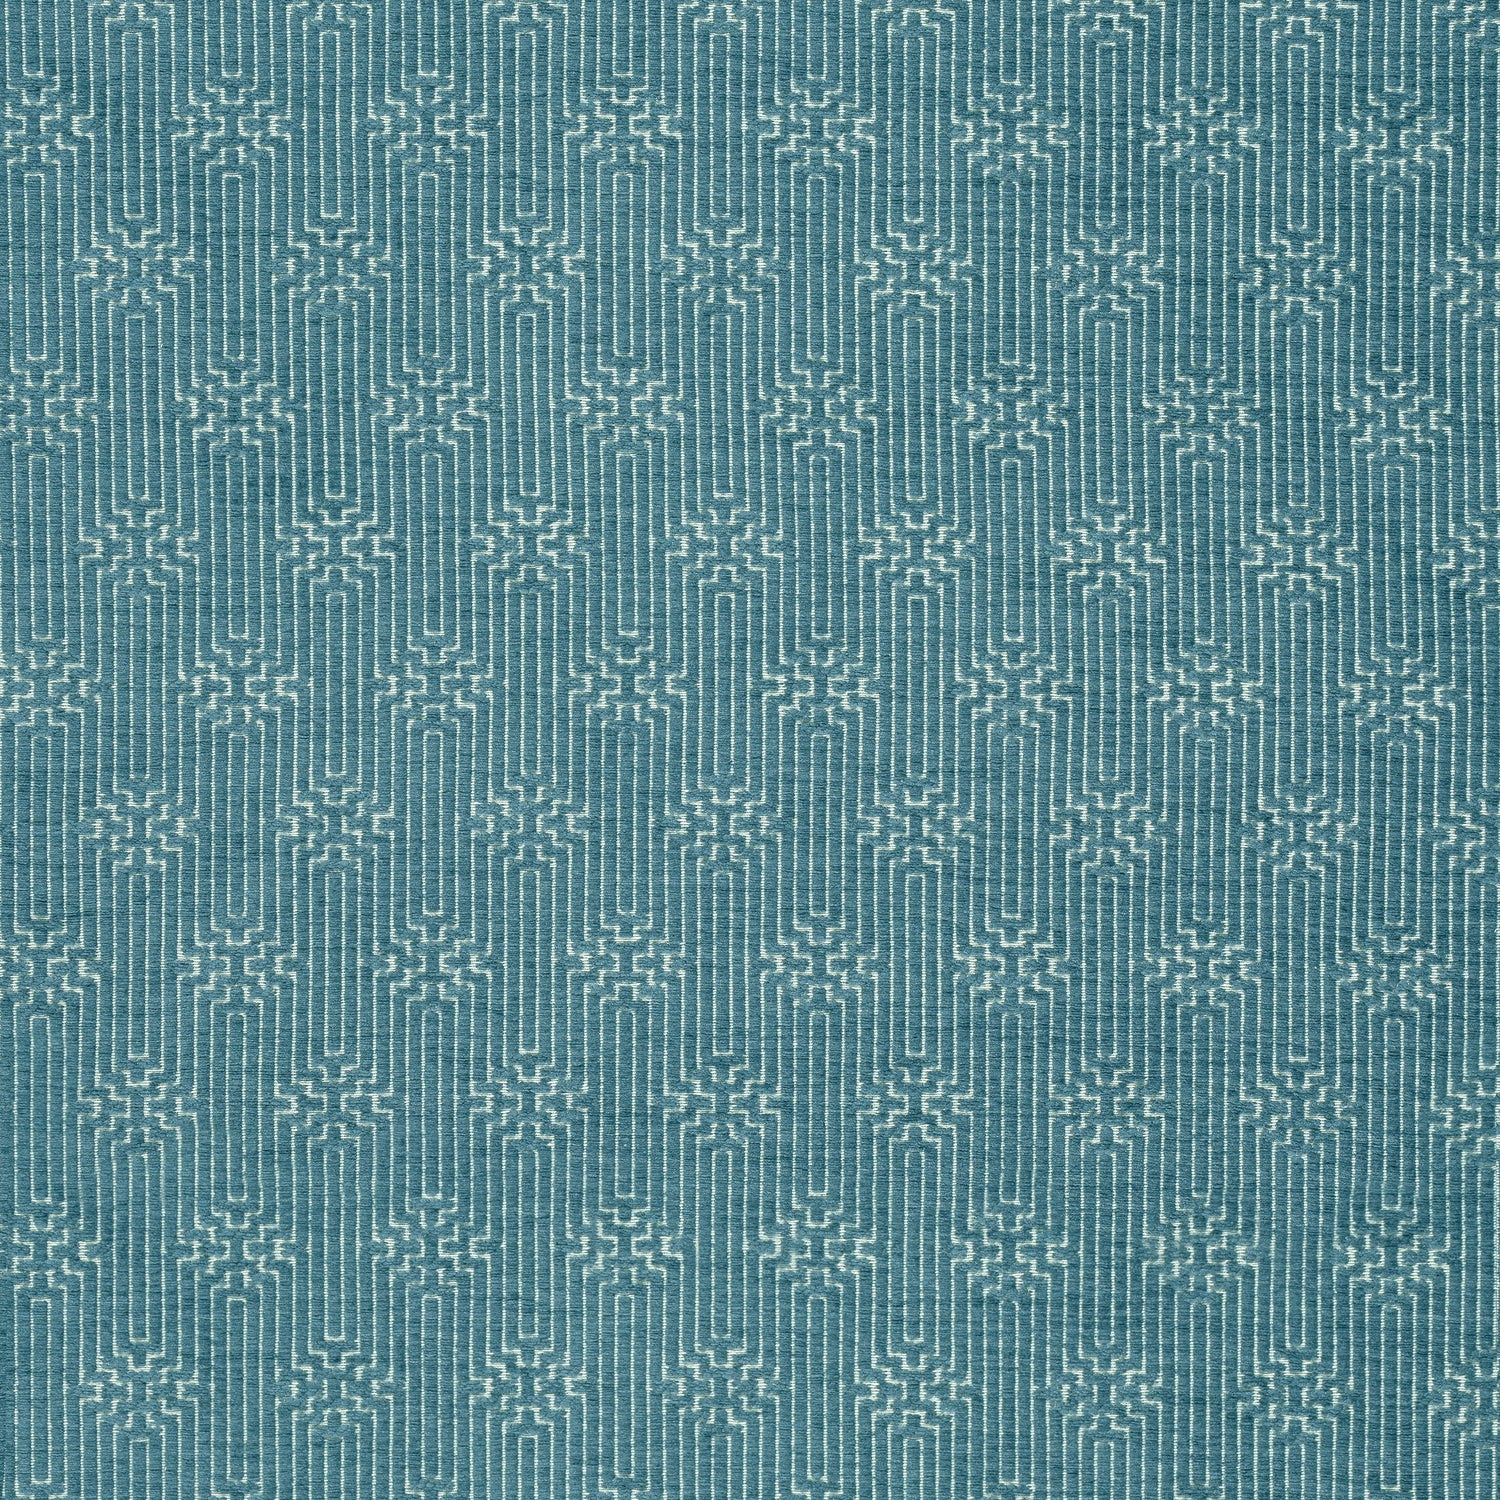 Crete fabric in peacock color - pattern number W74212 - by Thibaut in the Passage collection